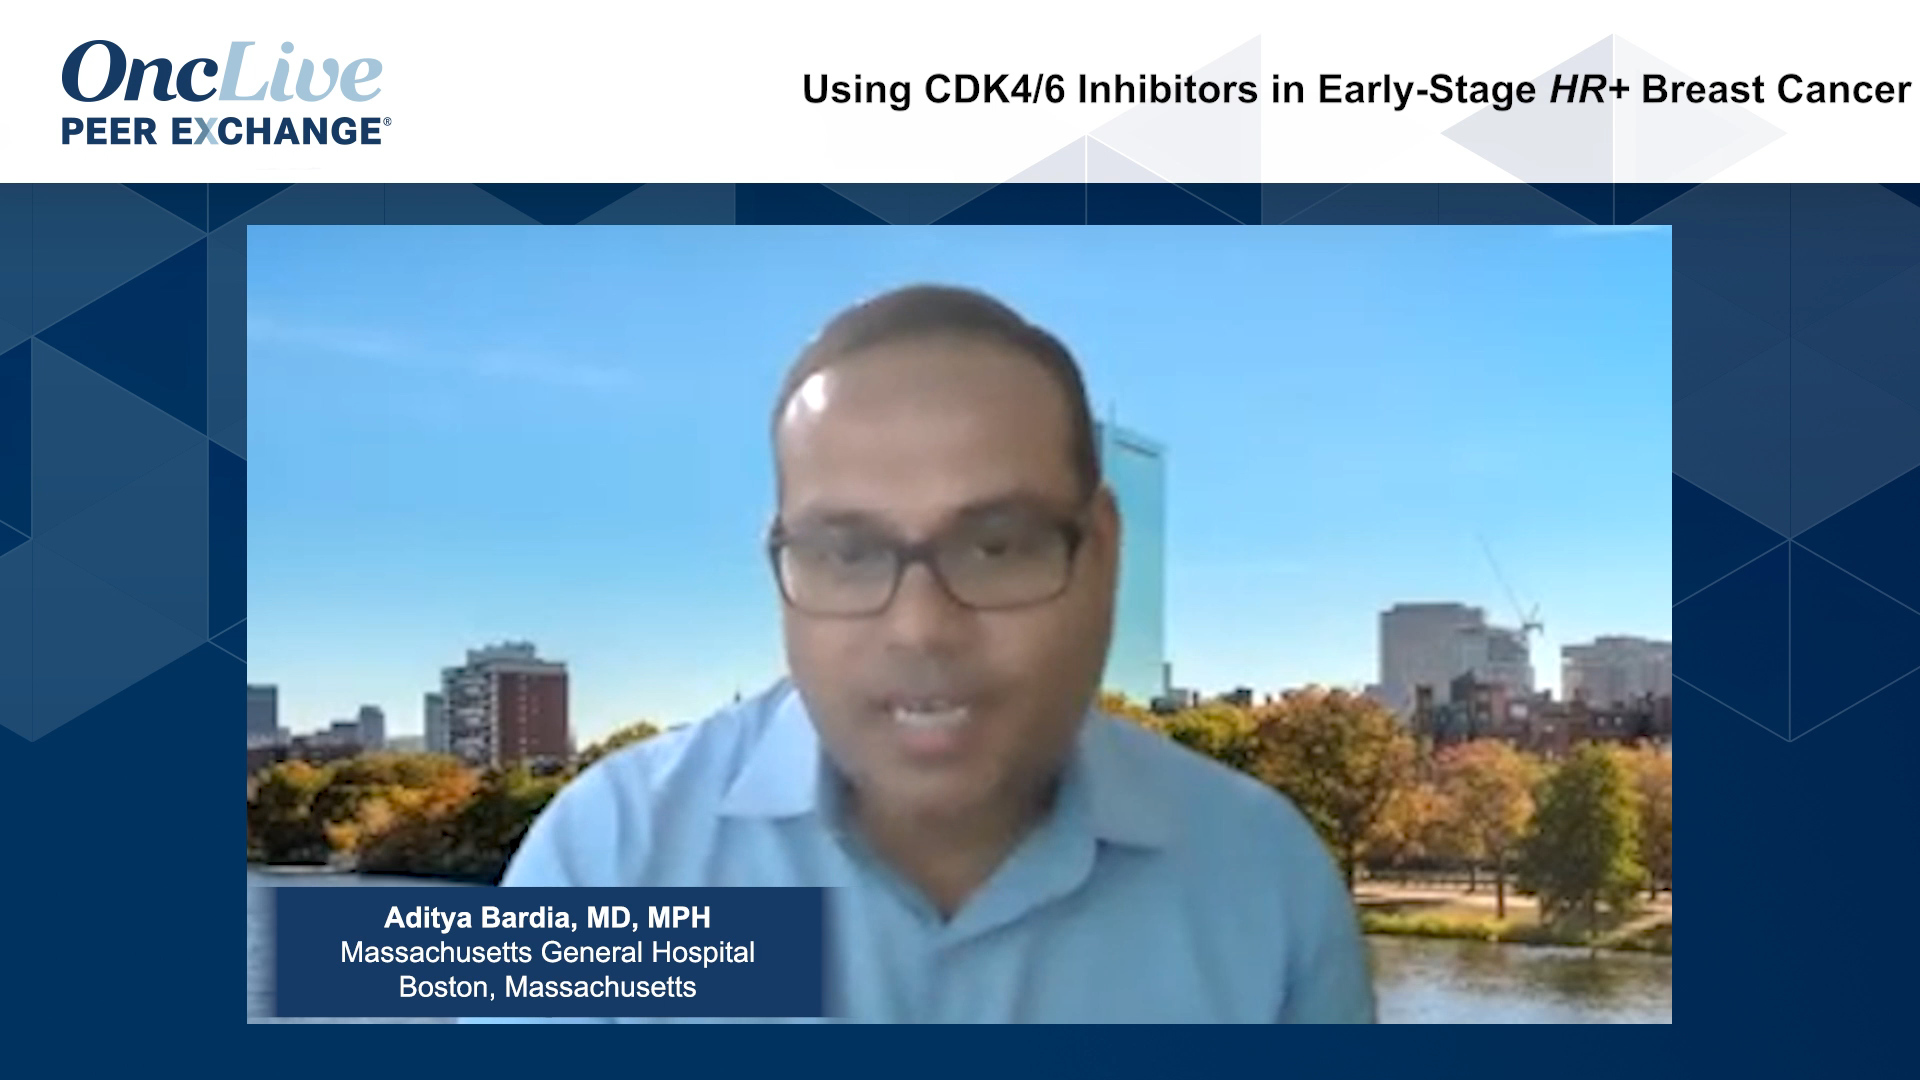 Using CDK4/6 Inhibitors in Early Stage HR+ Breast Cancer